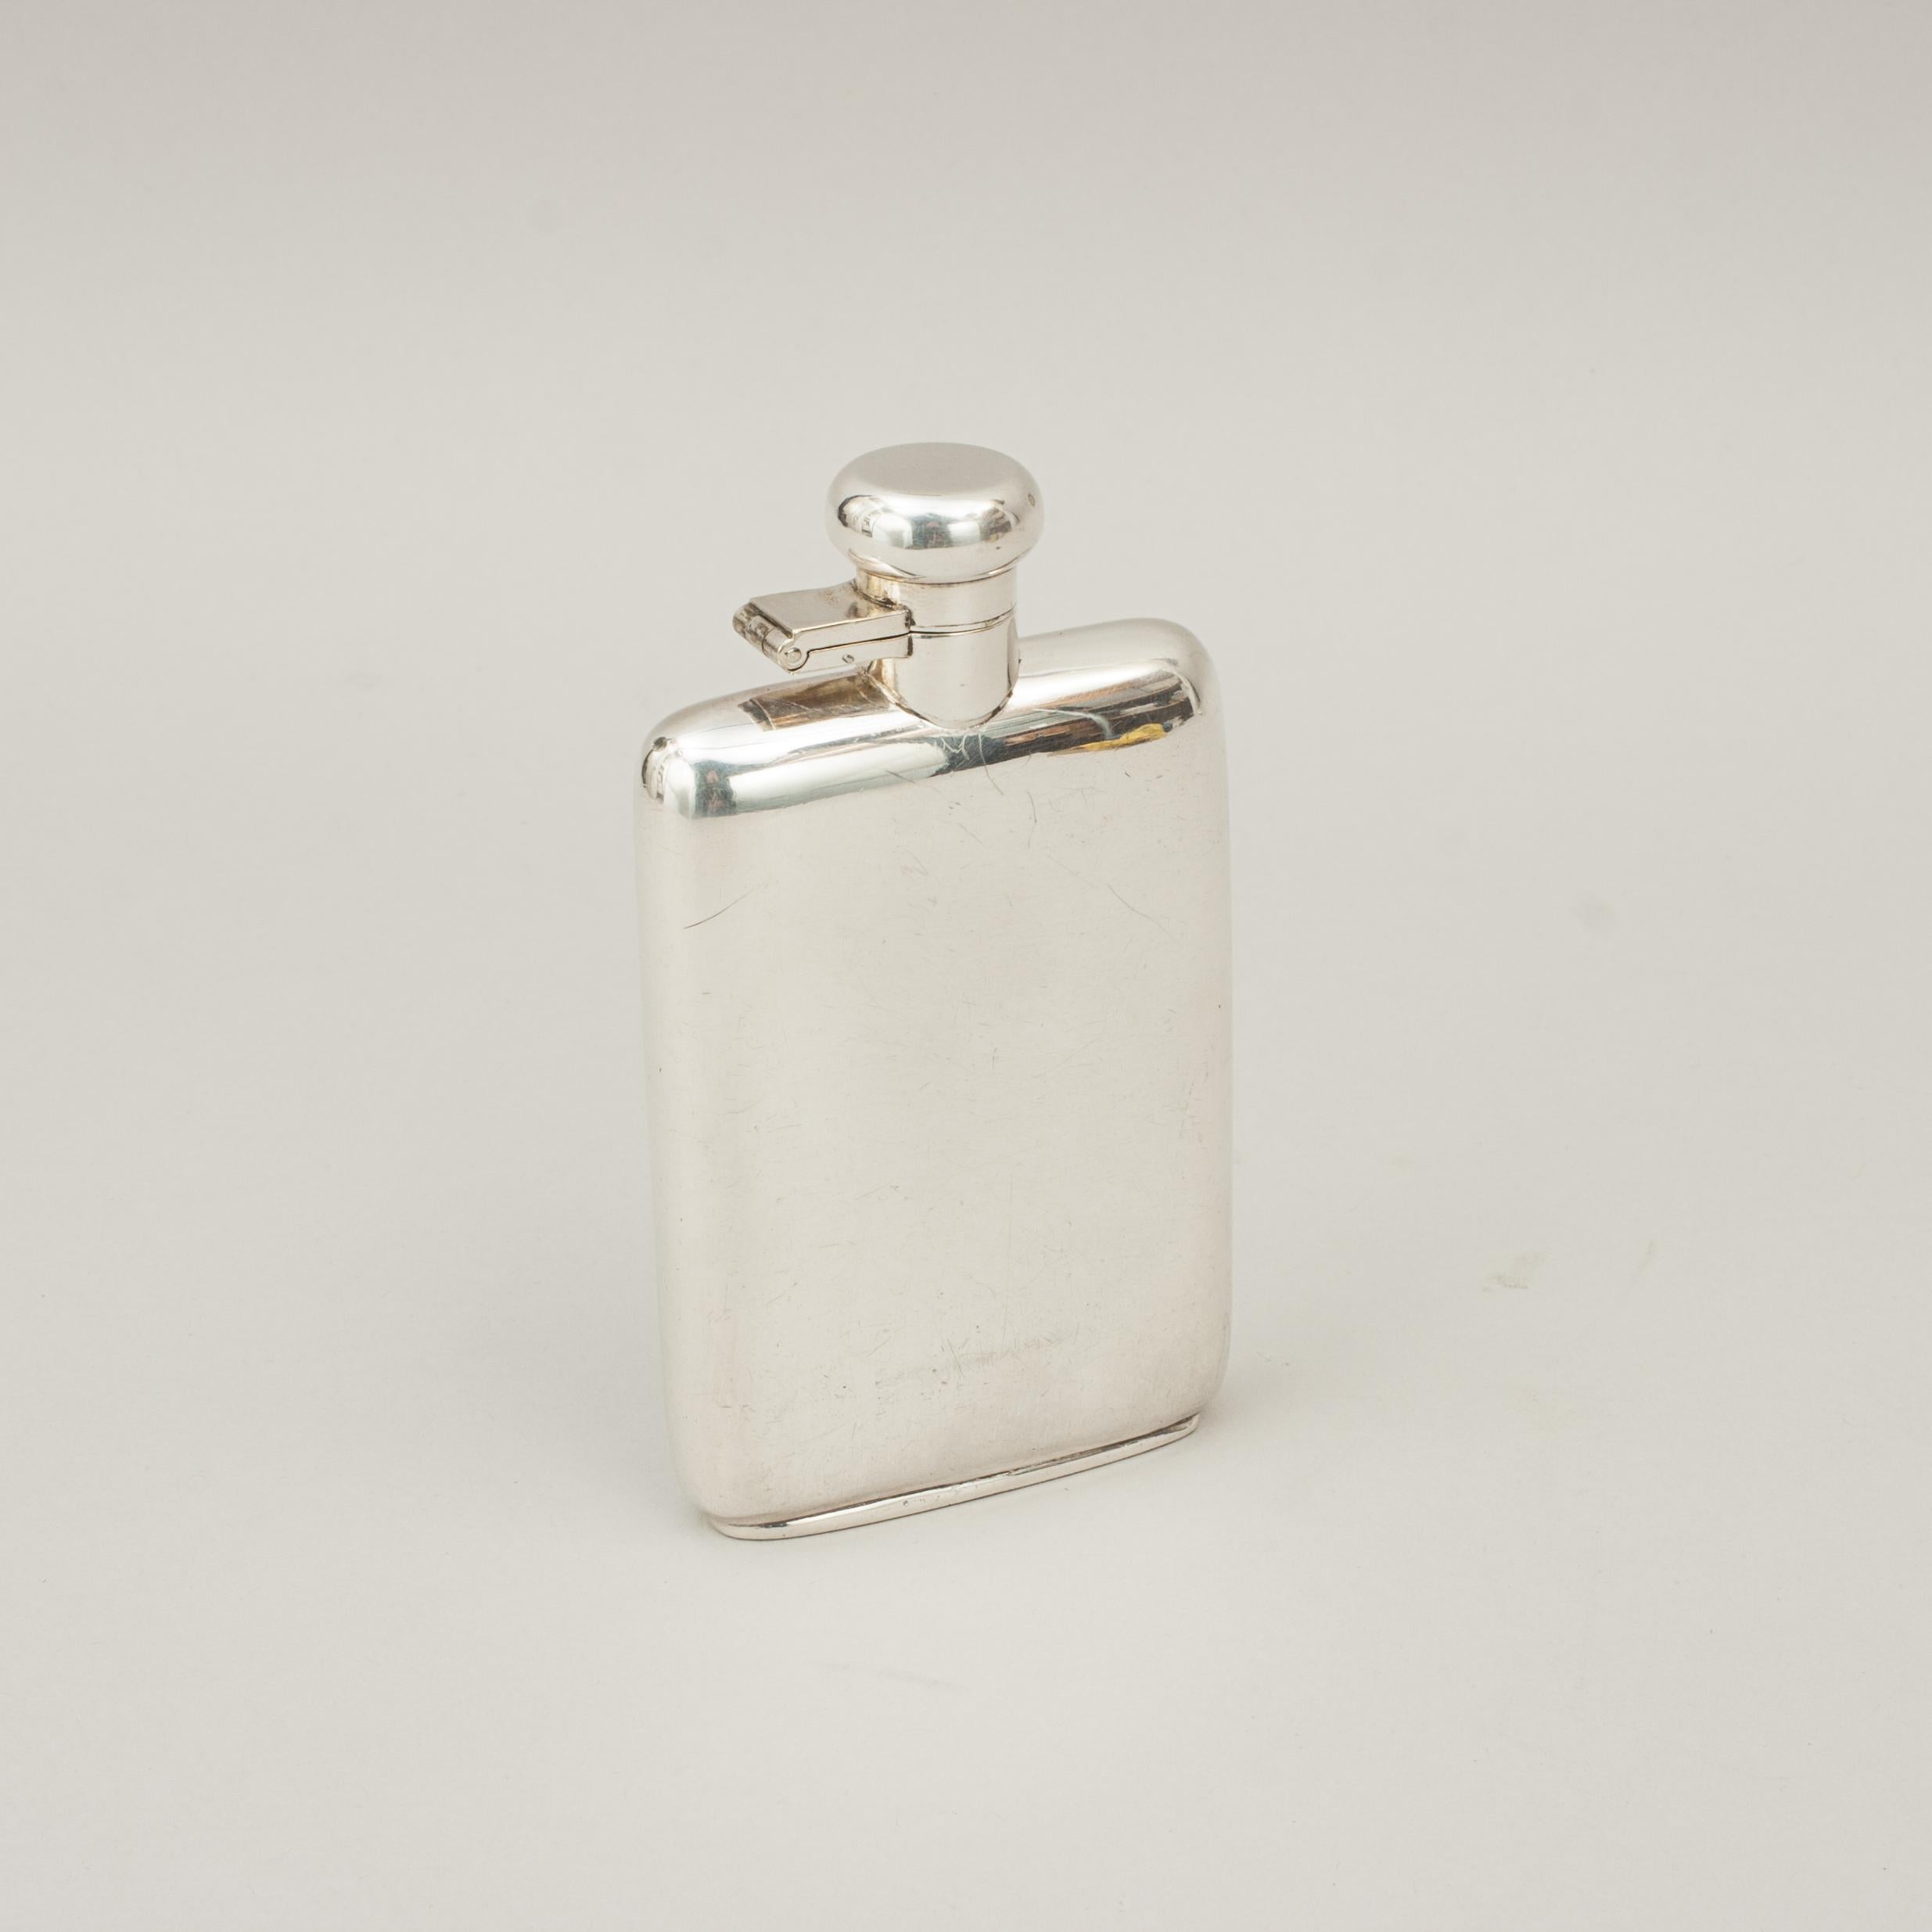 Silver Plated Hip Flask, William Hutton & Sons 2